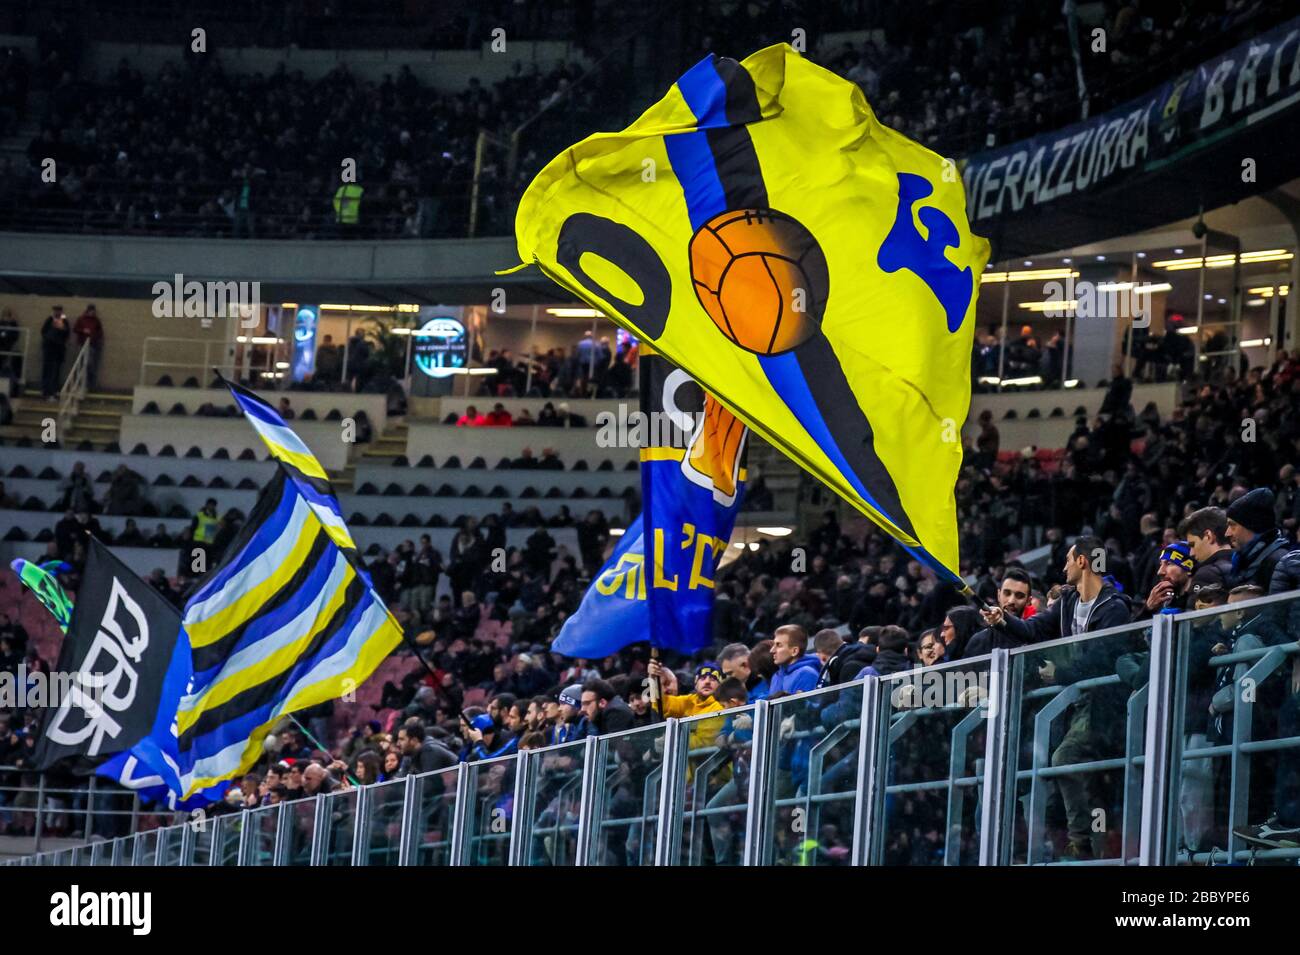 FC Internazionale supporters during soccer season 2019/20 symbolic images - Photo credit Fabrizio Carabelli /LM/ Stock Photo